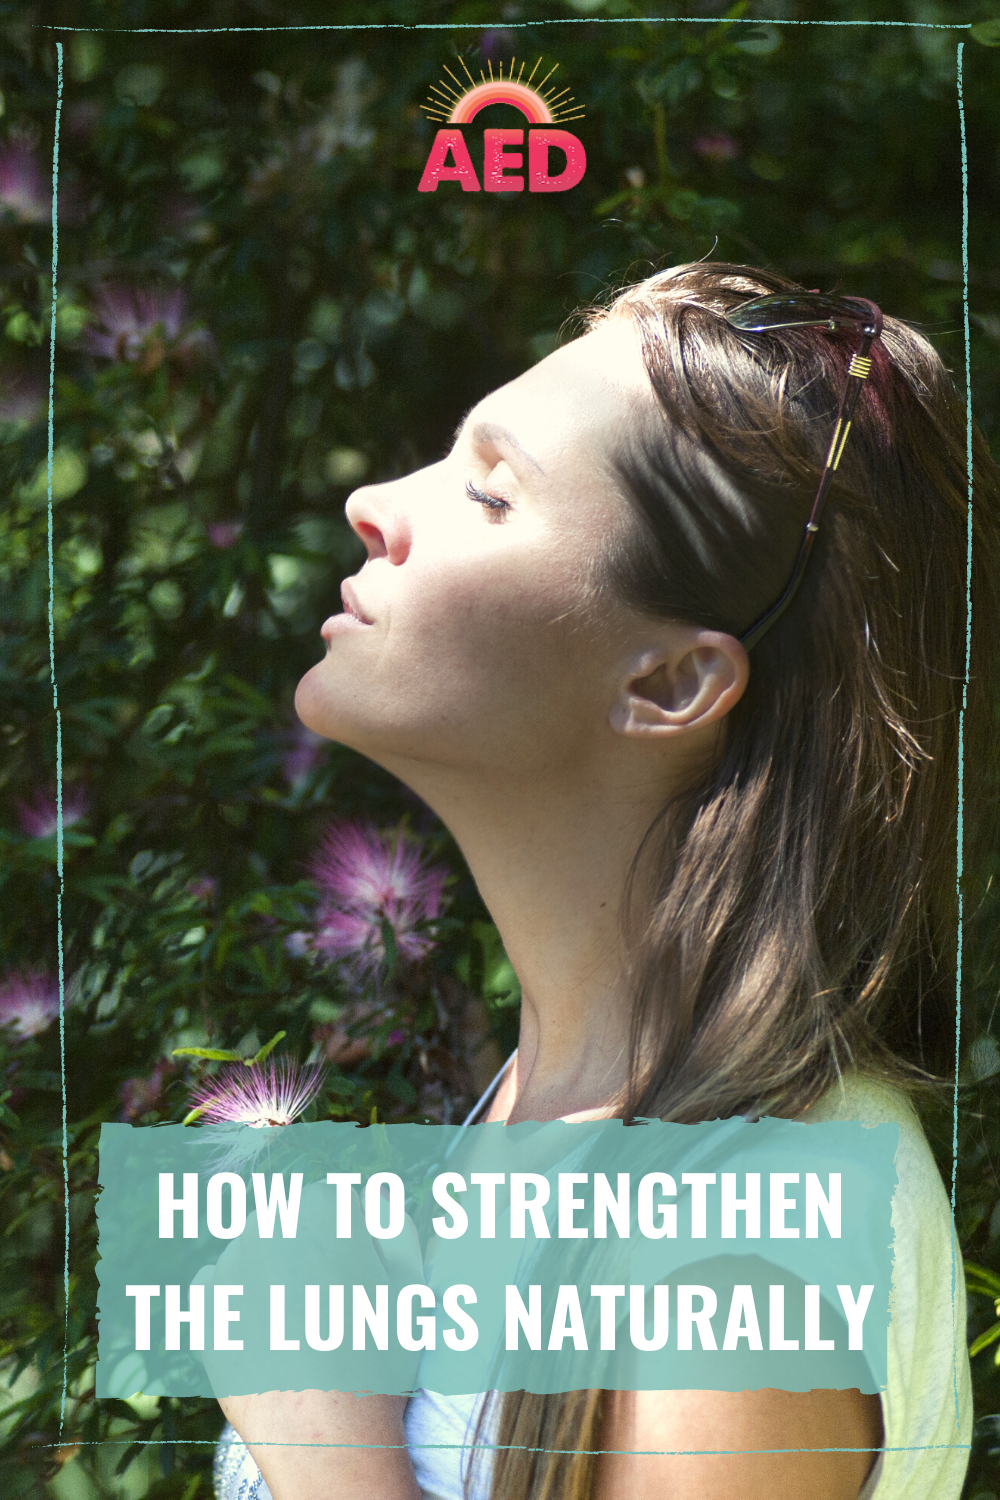 How to strengthen the lungs naturally